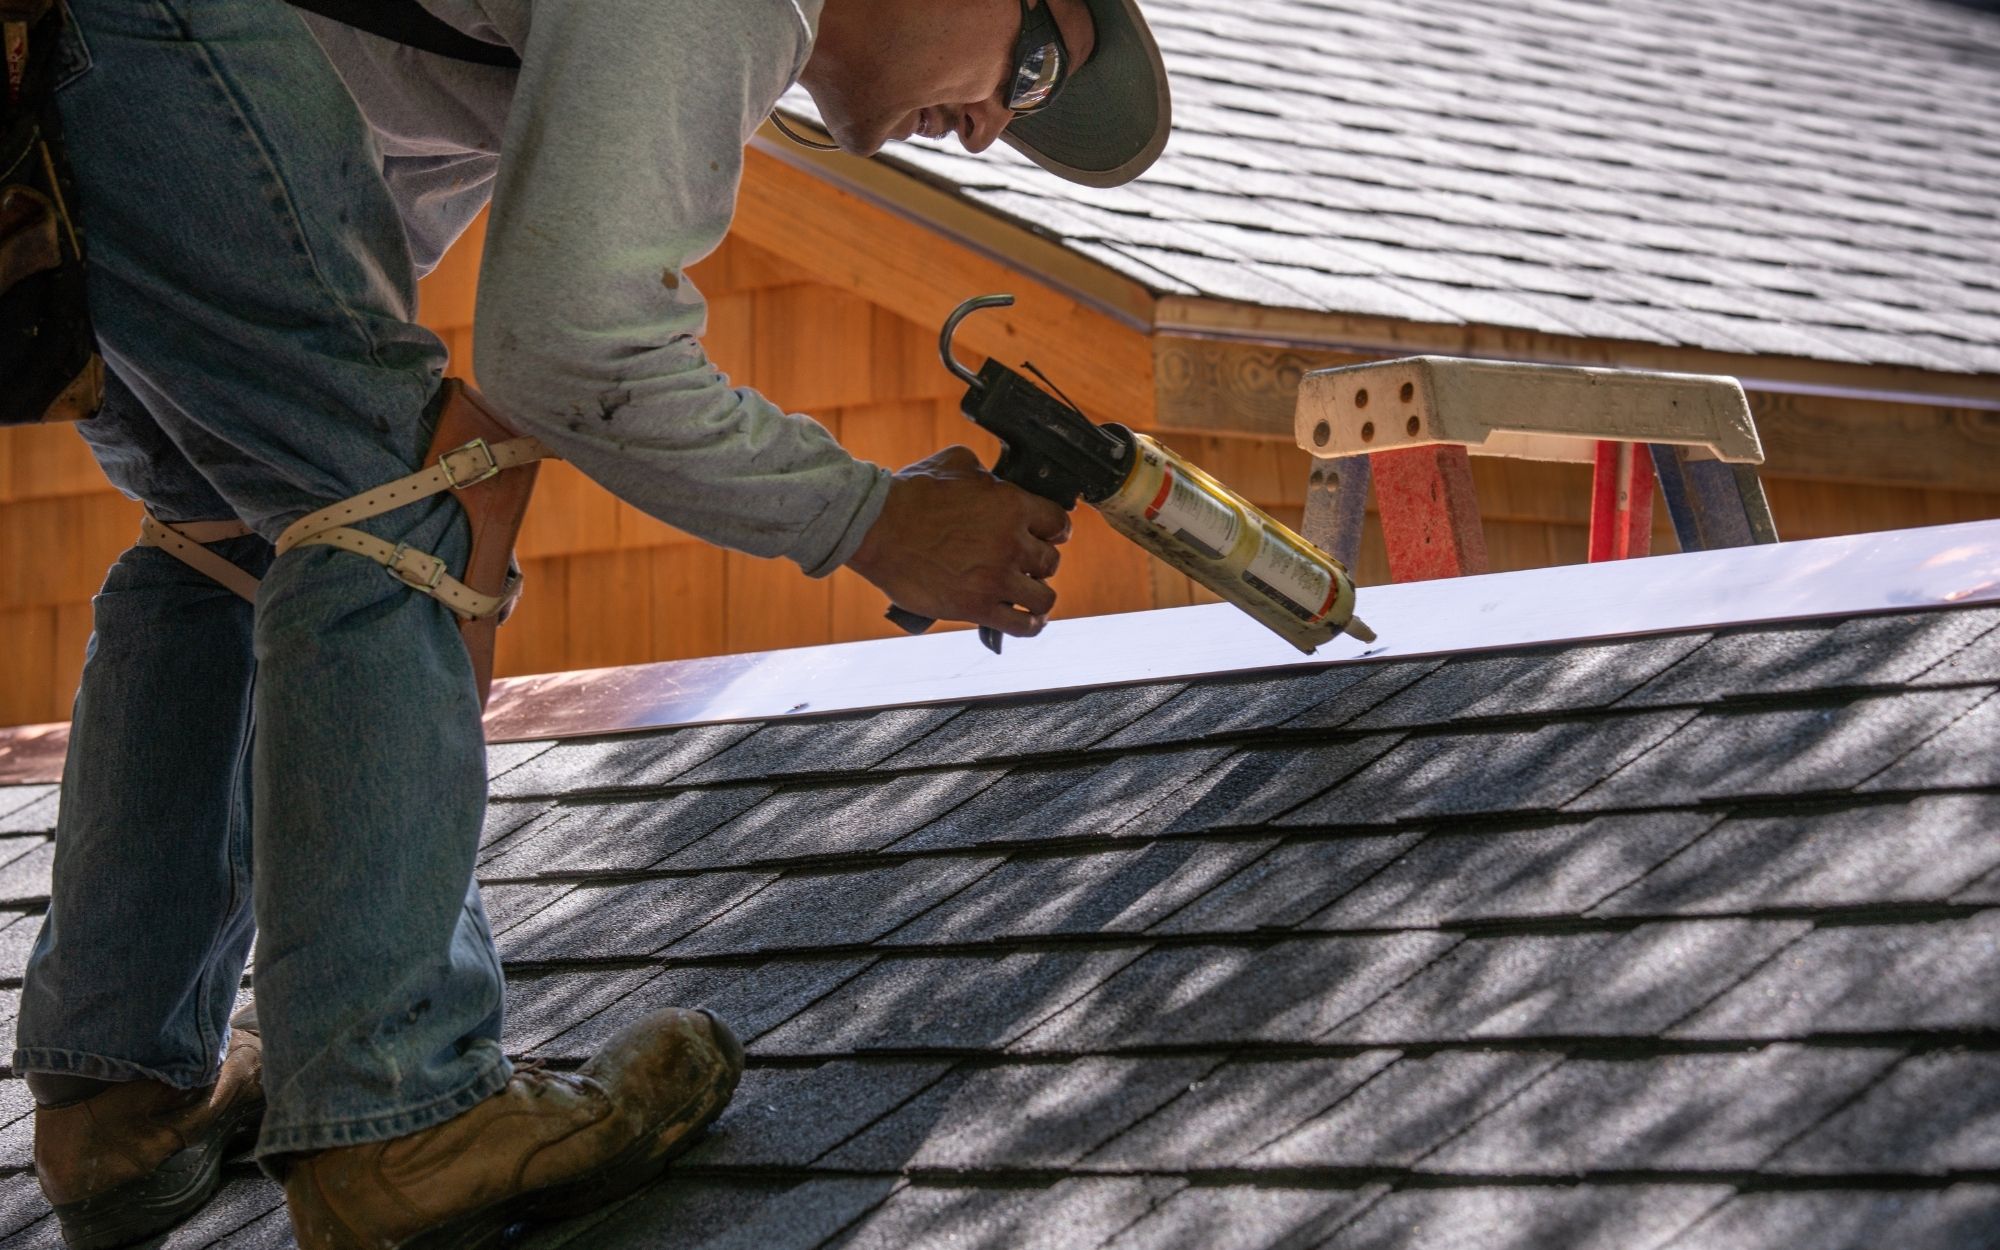 A man on a roof is using a caulking gun to fill in gaps in the shingles